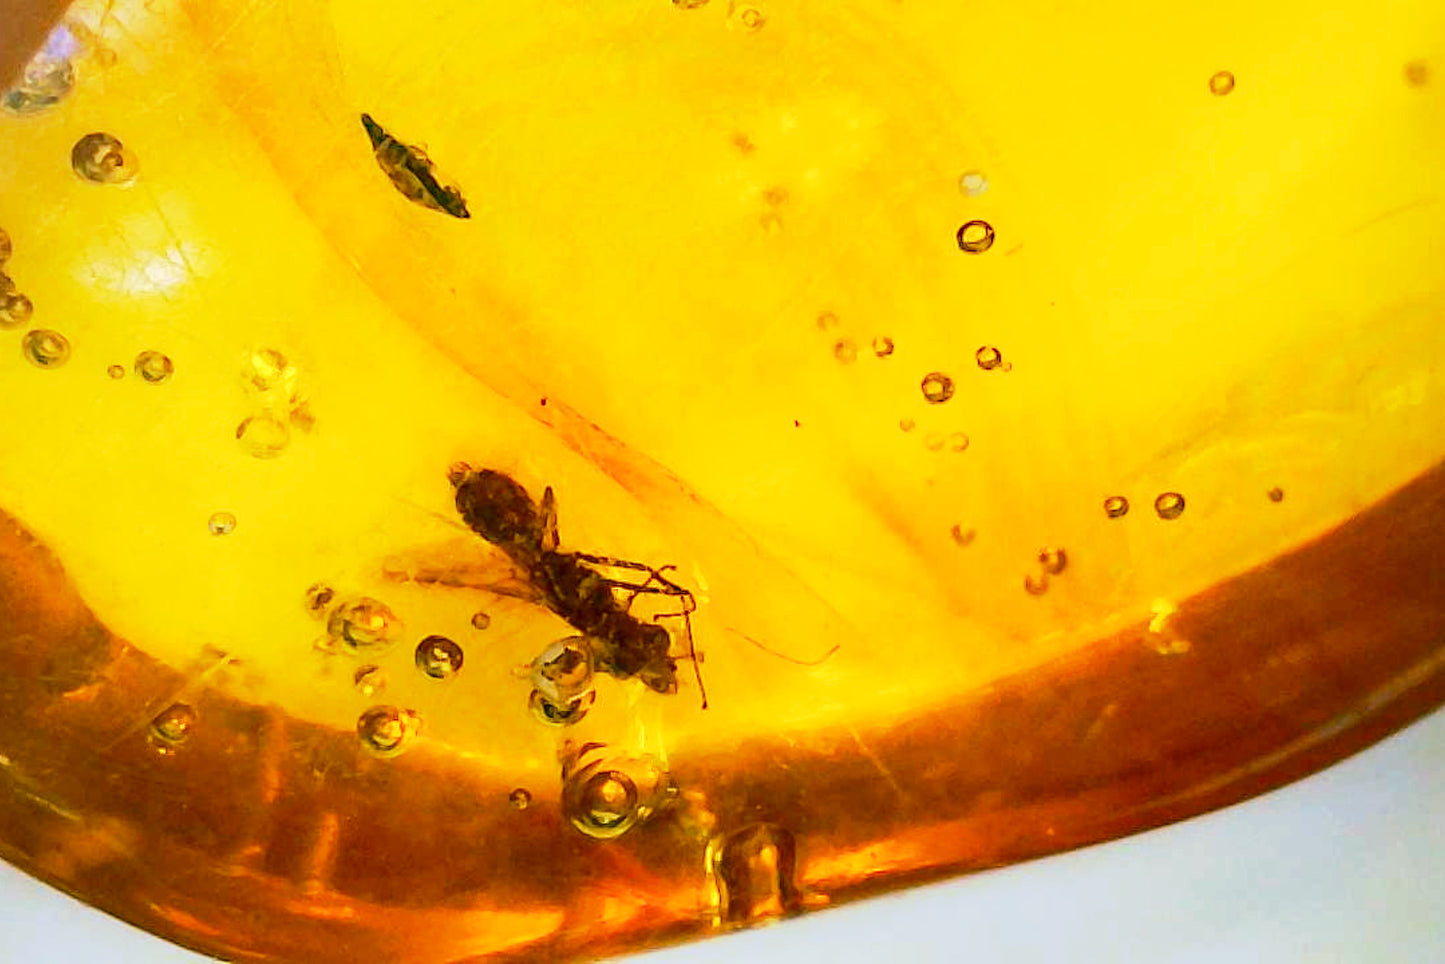 Dominican Republic Amber C with Insect Inclusion